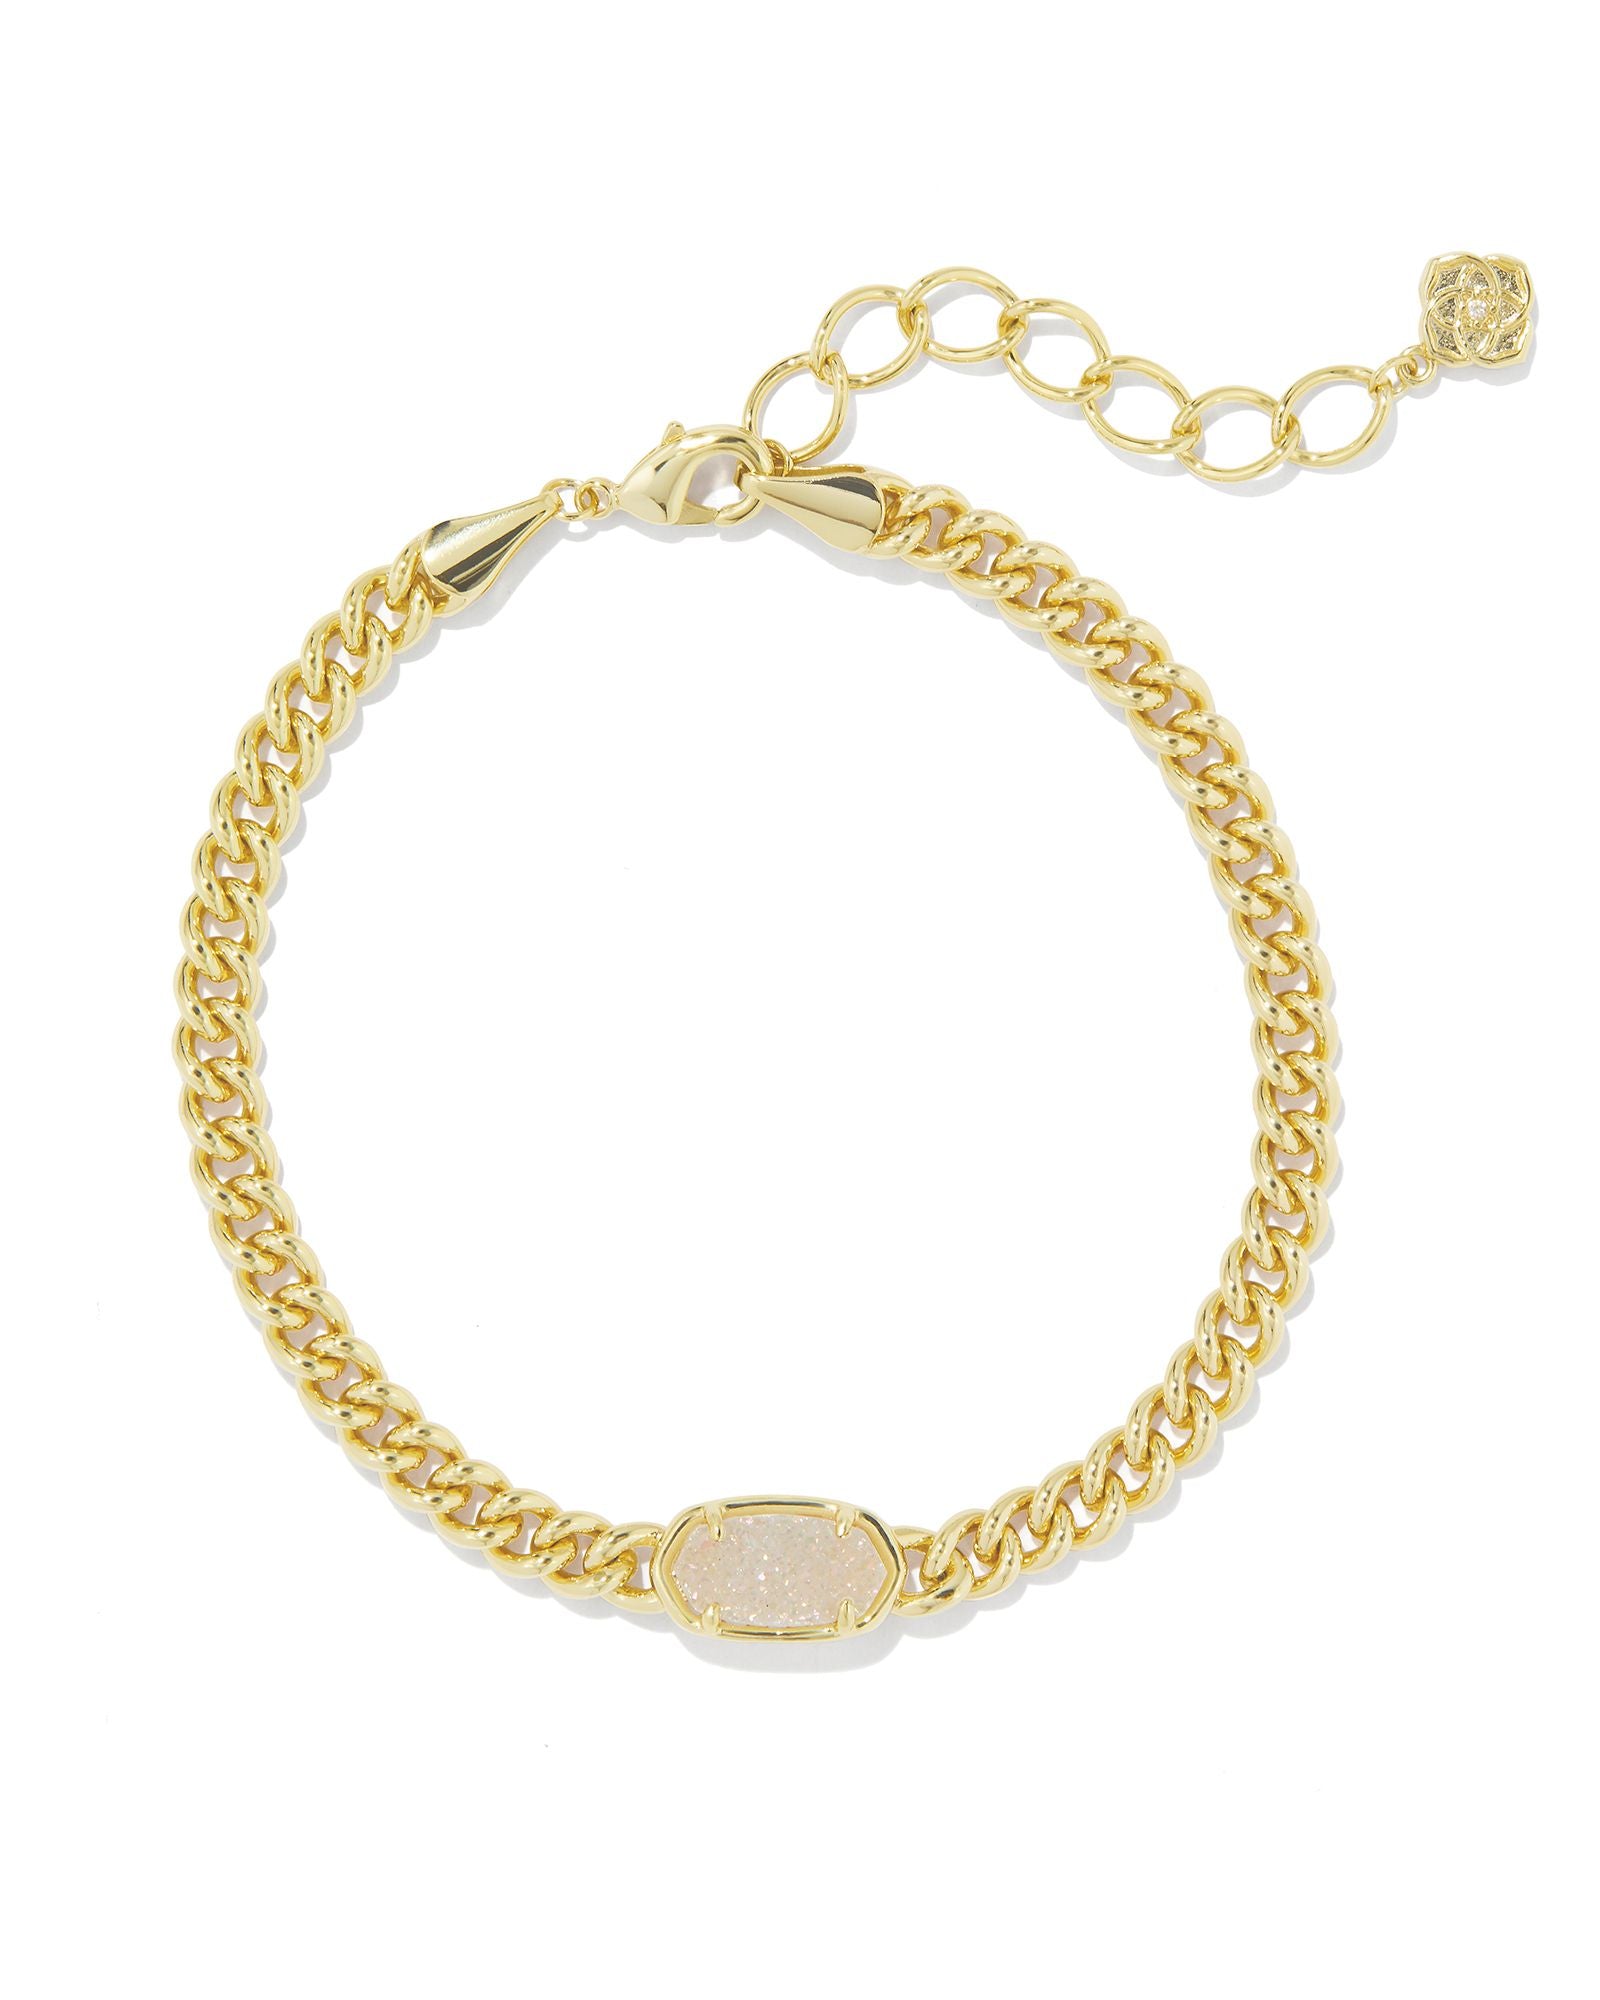 Grayson Gold Delicate Link and Chain Bracelet Iridescent Drusy